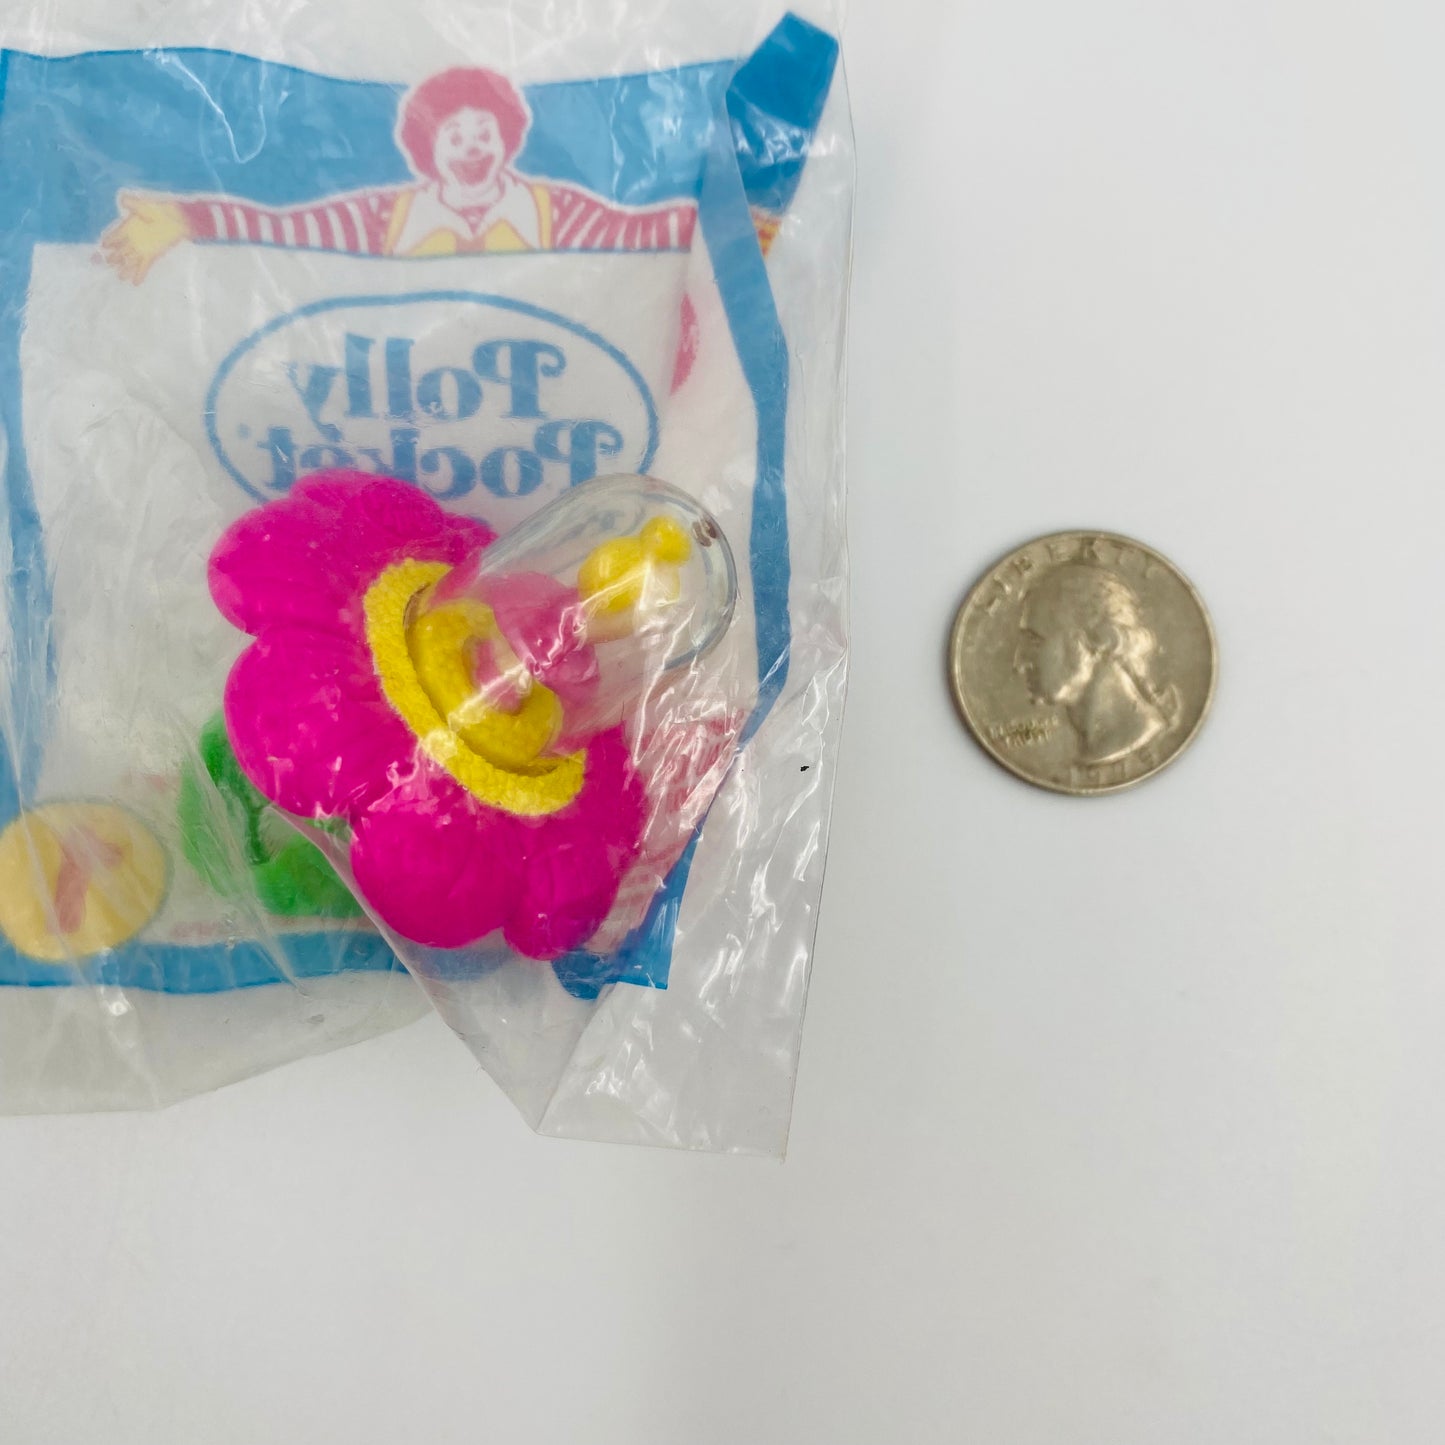 Polly Pocket Ring McDonald's Happy Meal toy (1994) bagged